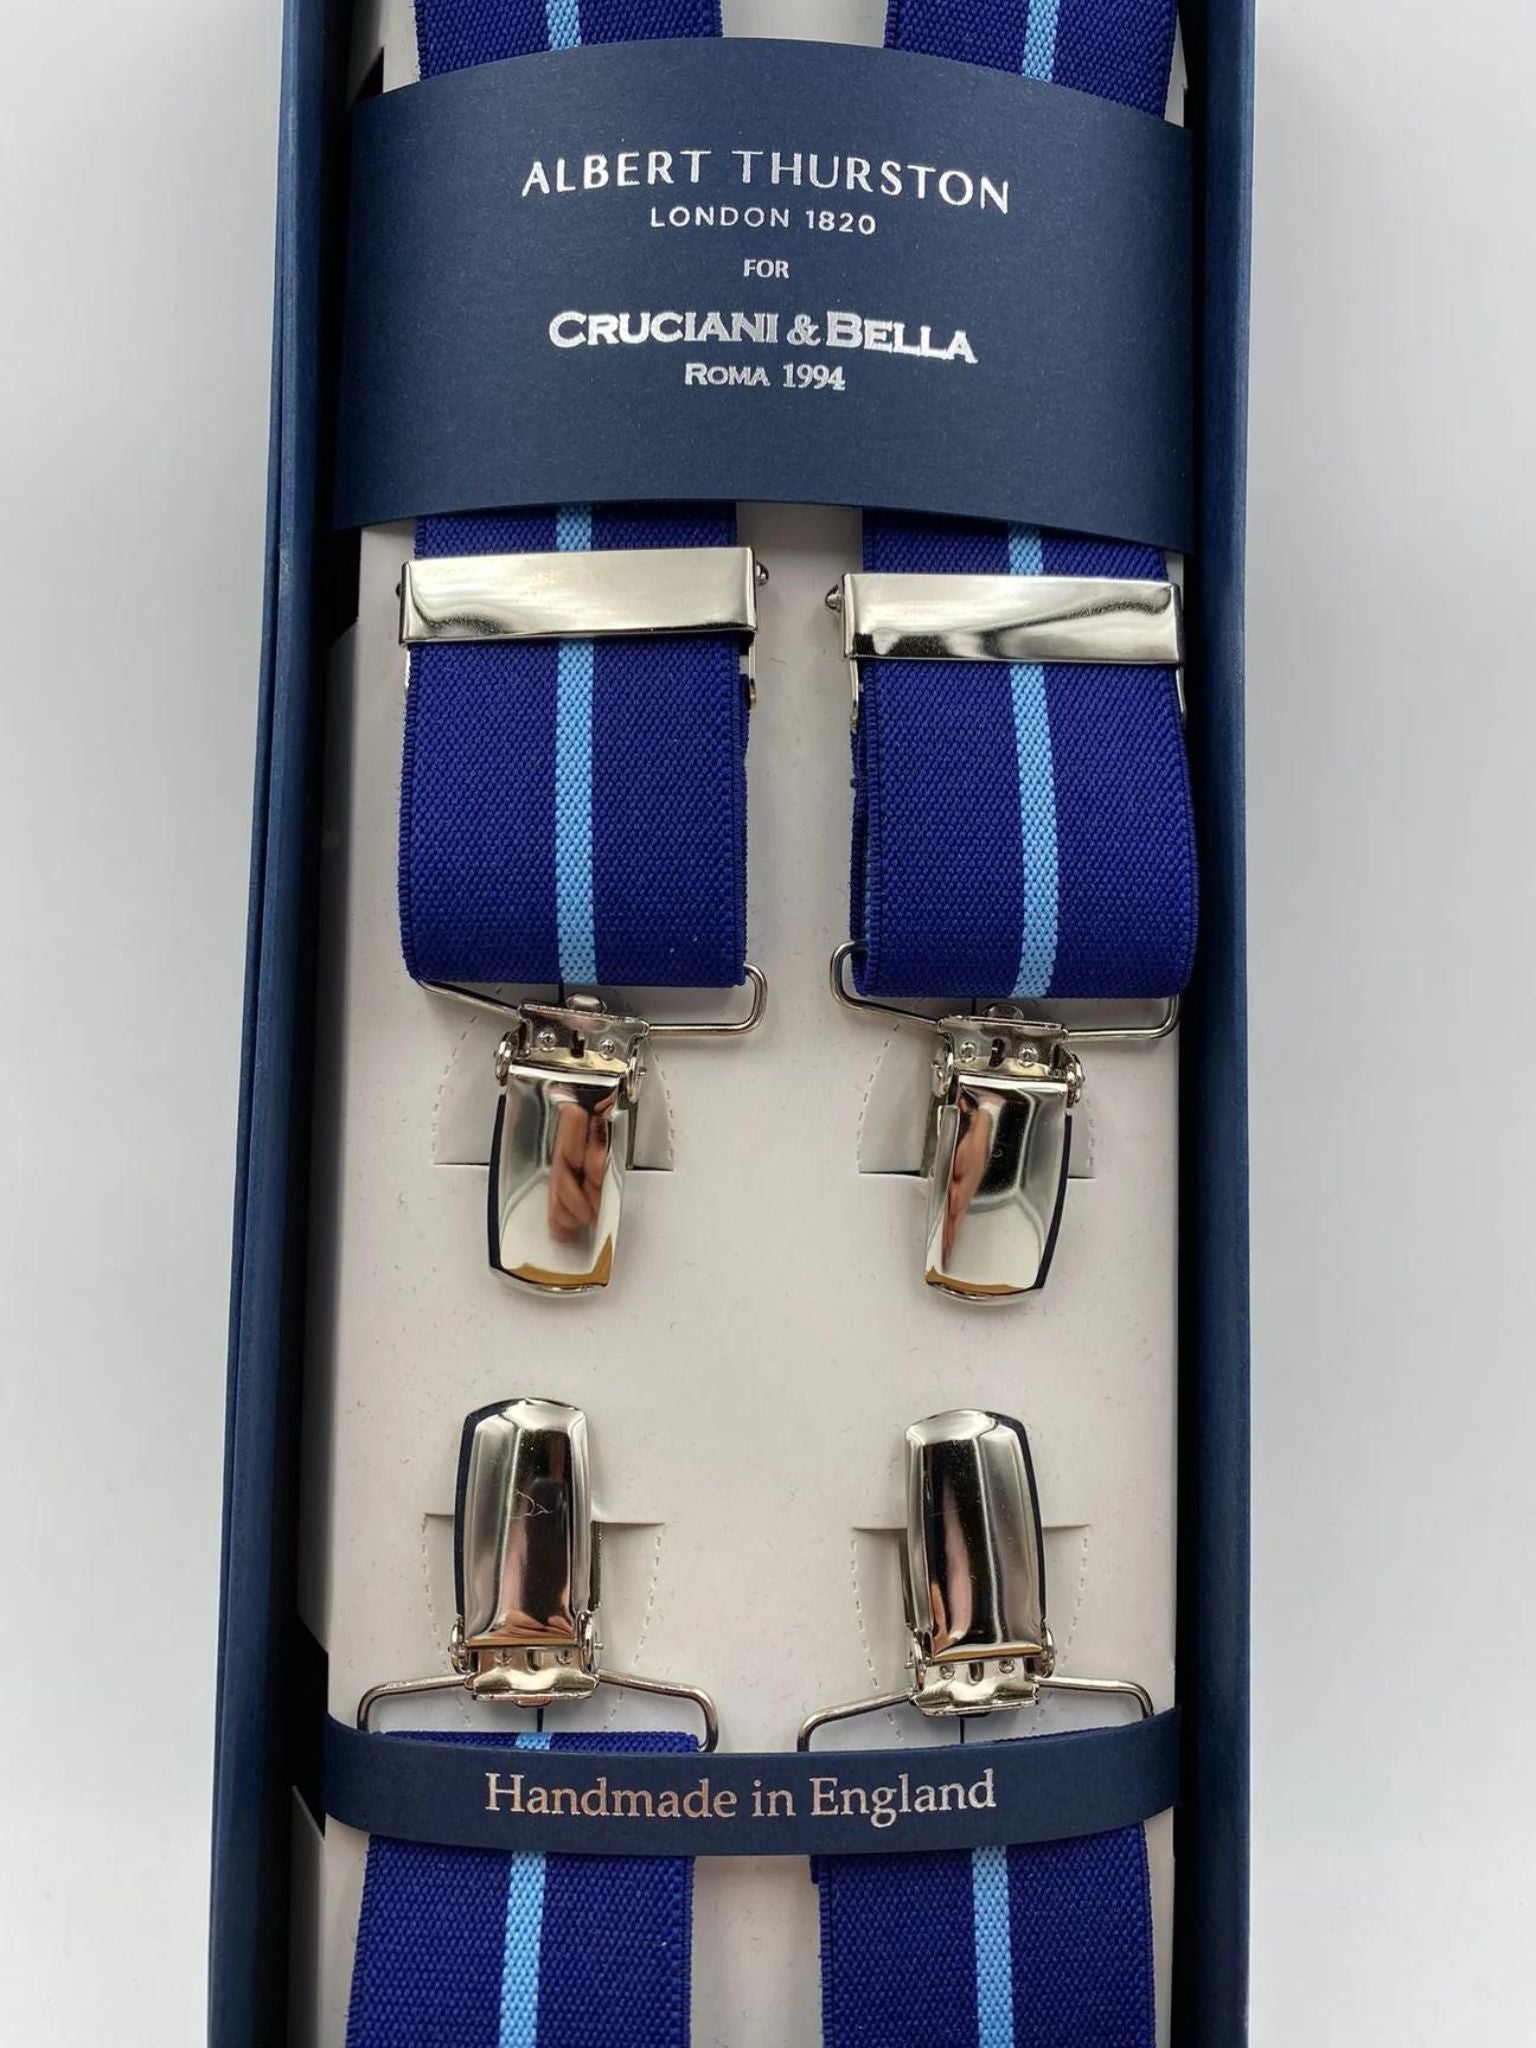 Albert Thurston for Cruciani & Bella Made in England Clip on Adjustable Sizing 35 mm elastic braces Blue and Sky Blue Stripe X-Shaped Nickel Fittings Size: L